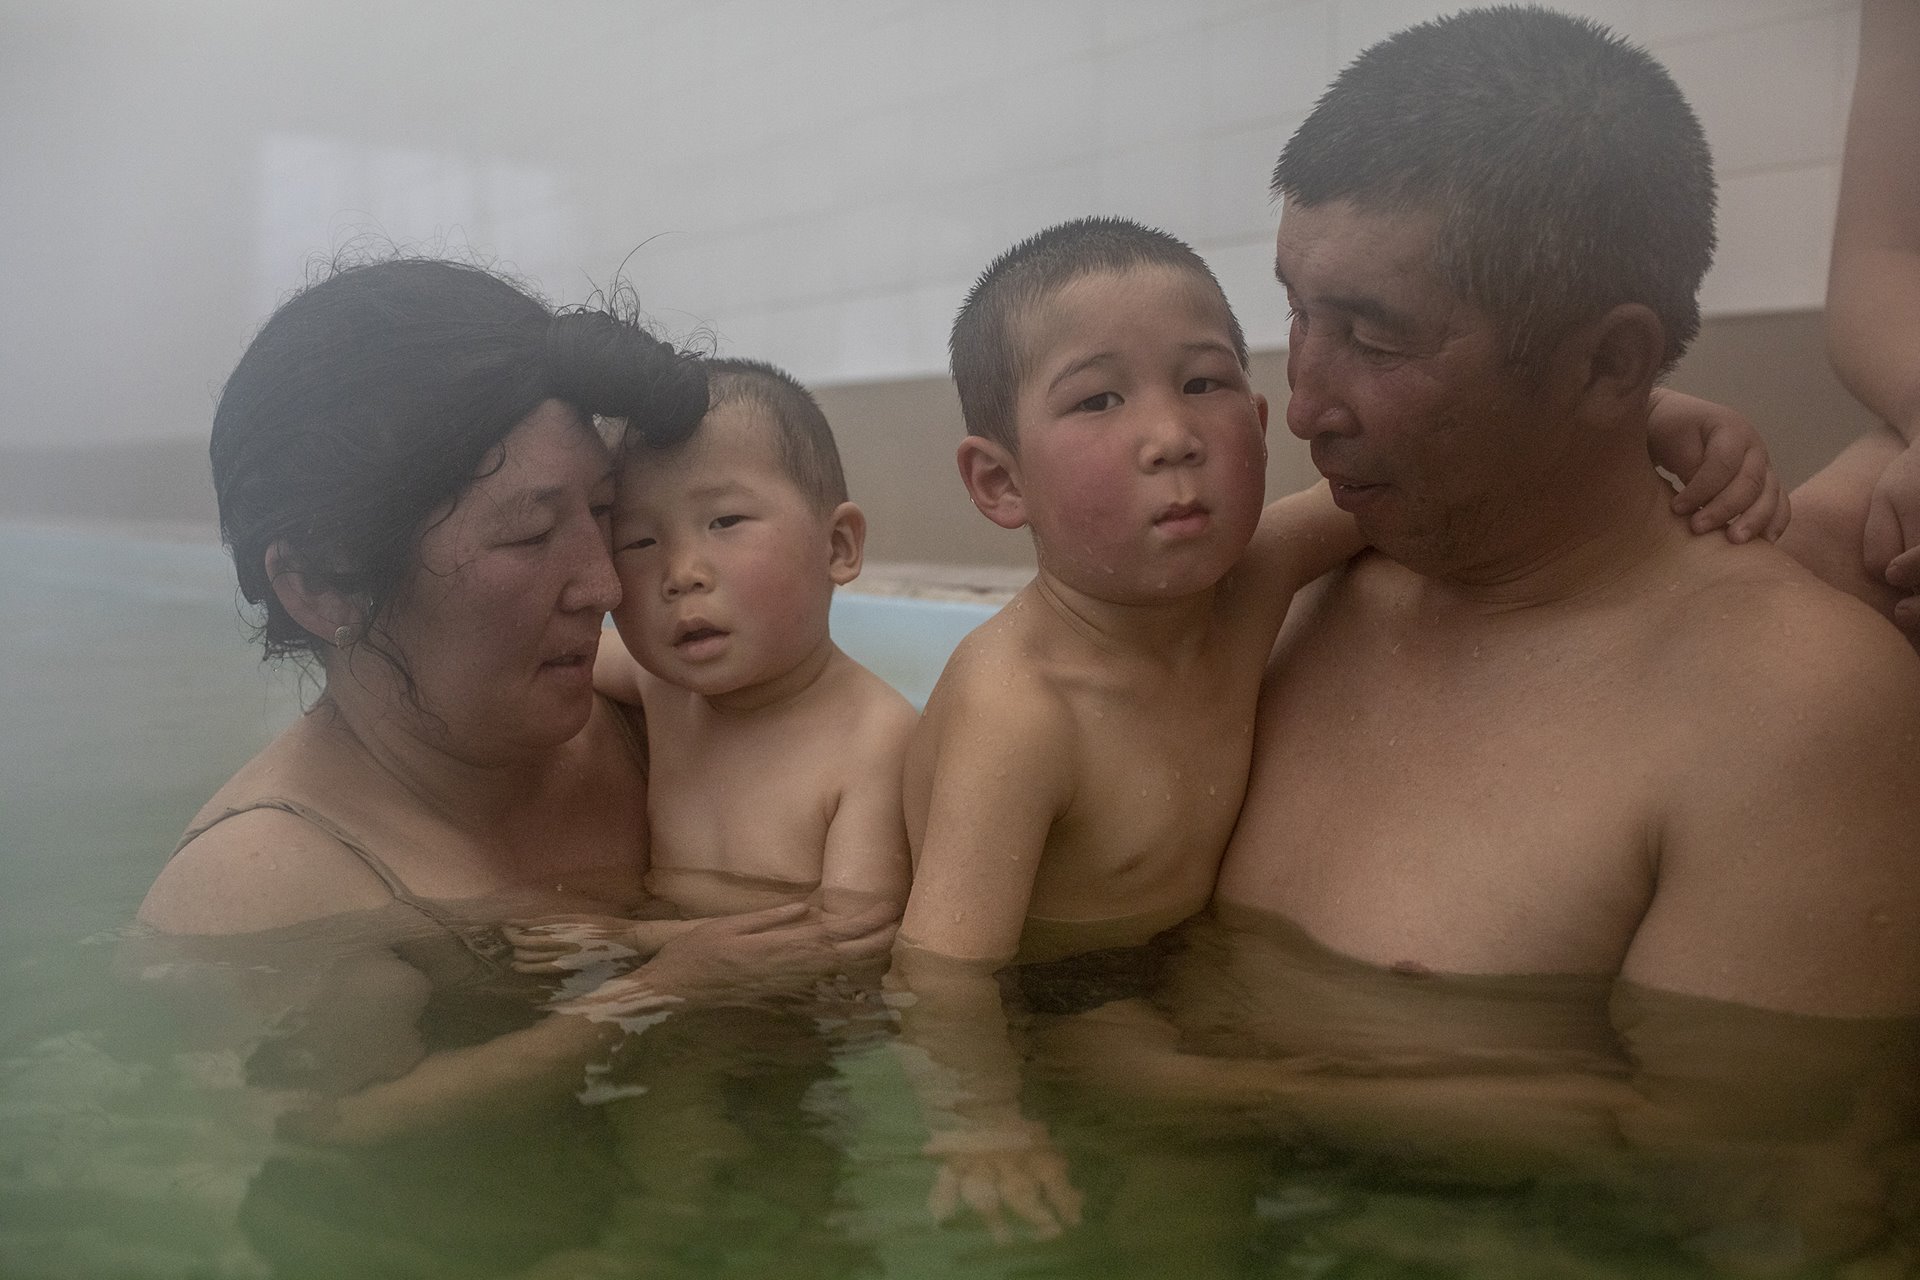 Jaynagul Brjieva (37) and her family (from left to right) Adakhan (2), &nbsp;Alikhan (3), and Nurlan Bayduev (41) enjoy an outing to a hot spring in Kaji-Say, Kyrgyzstan. The waters are thought by some to have healing properties.